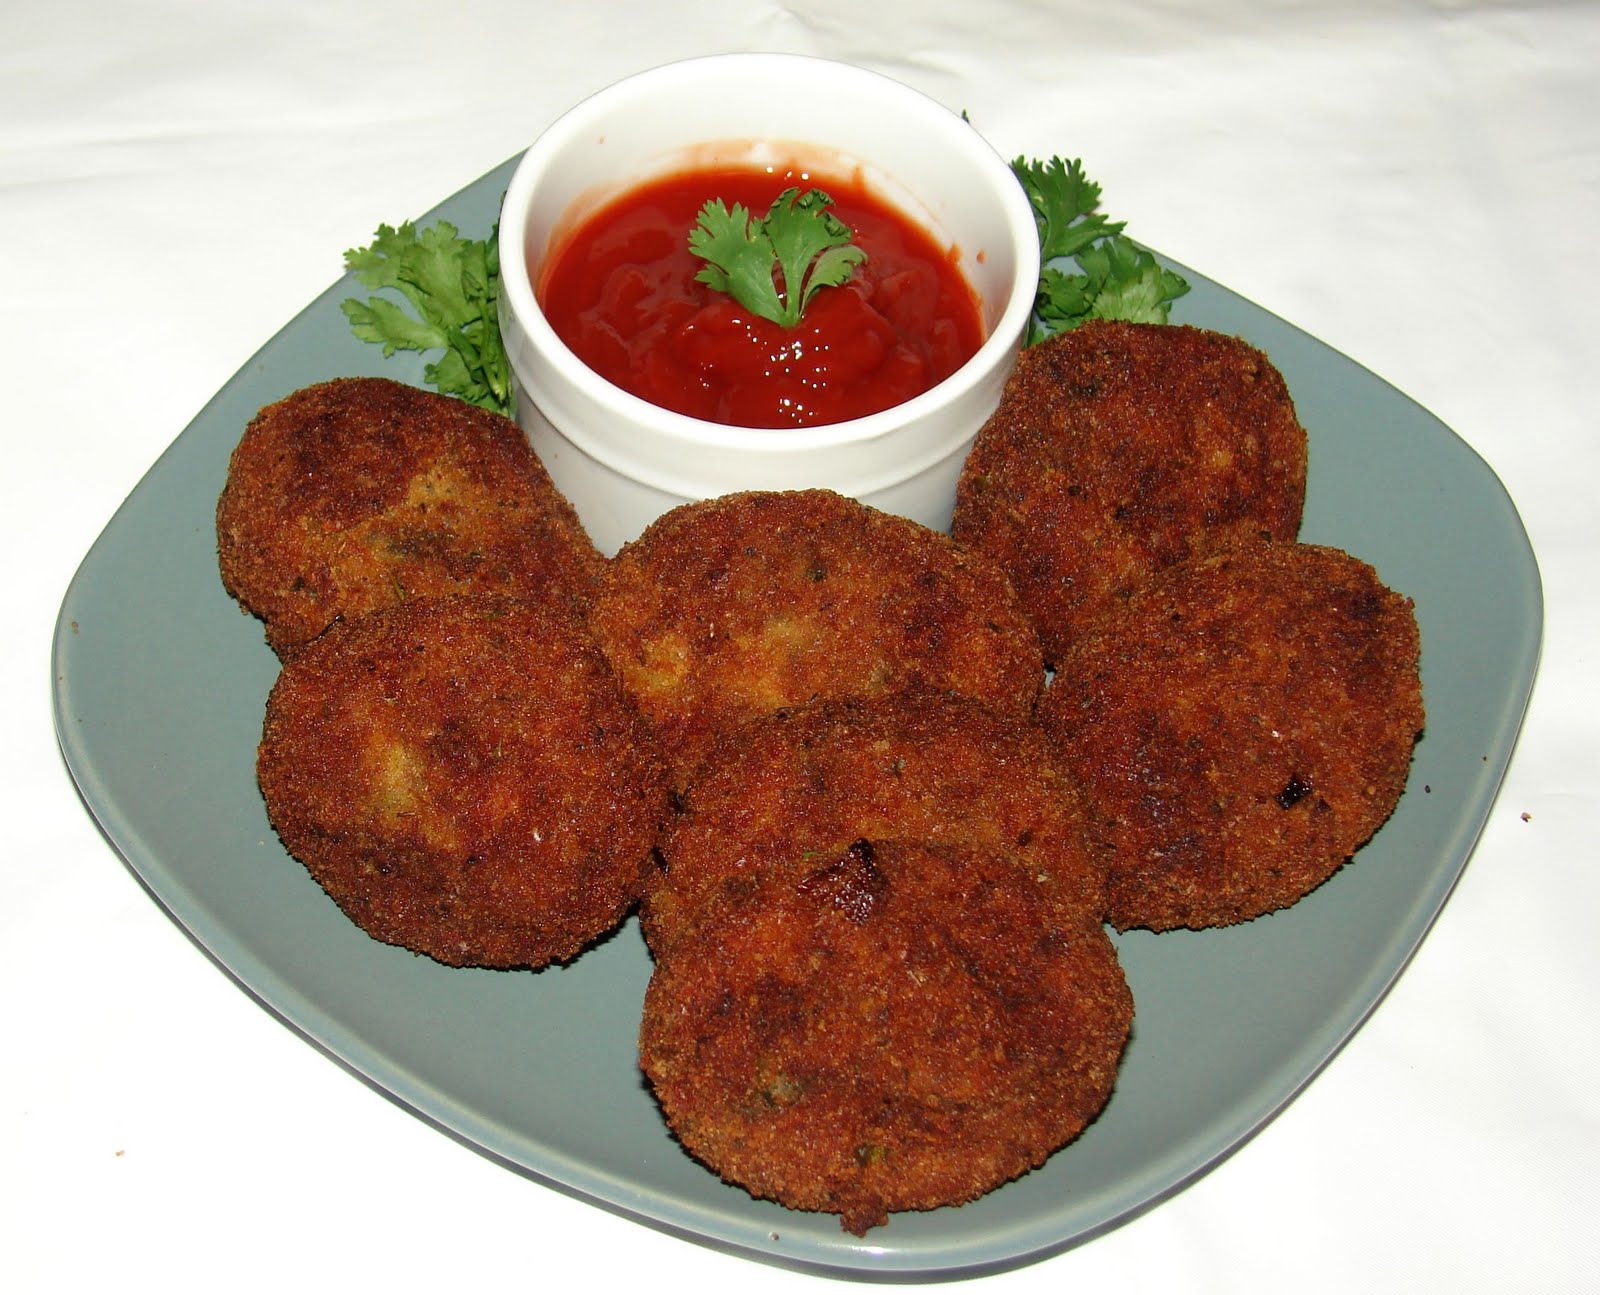 cutlets